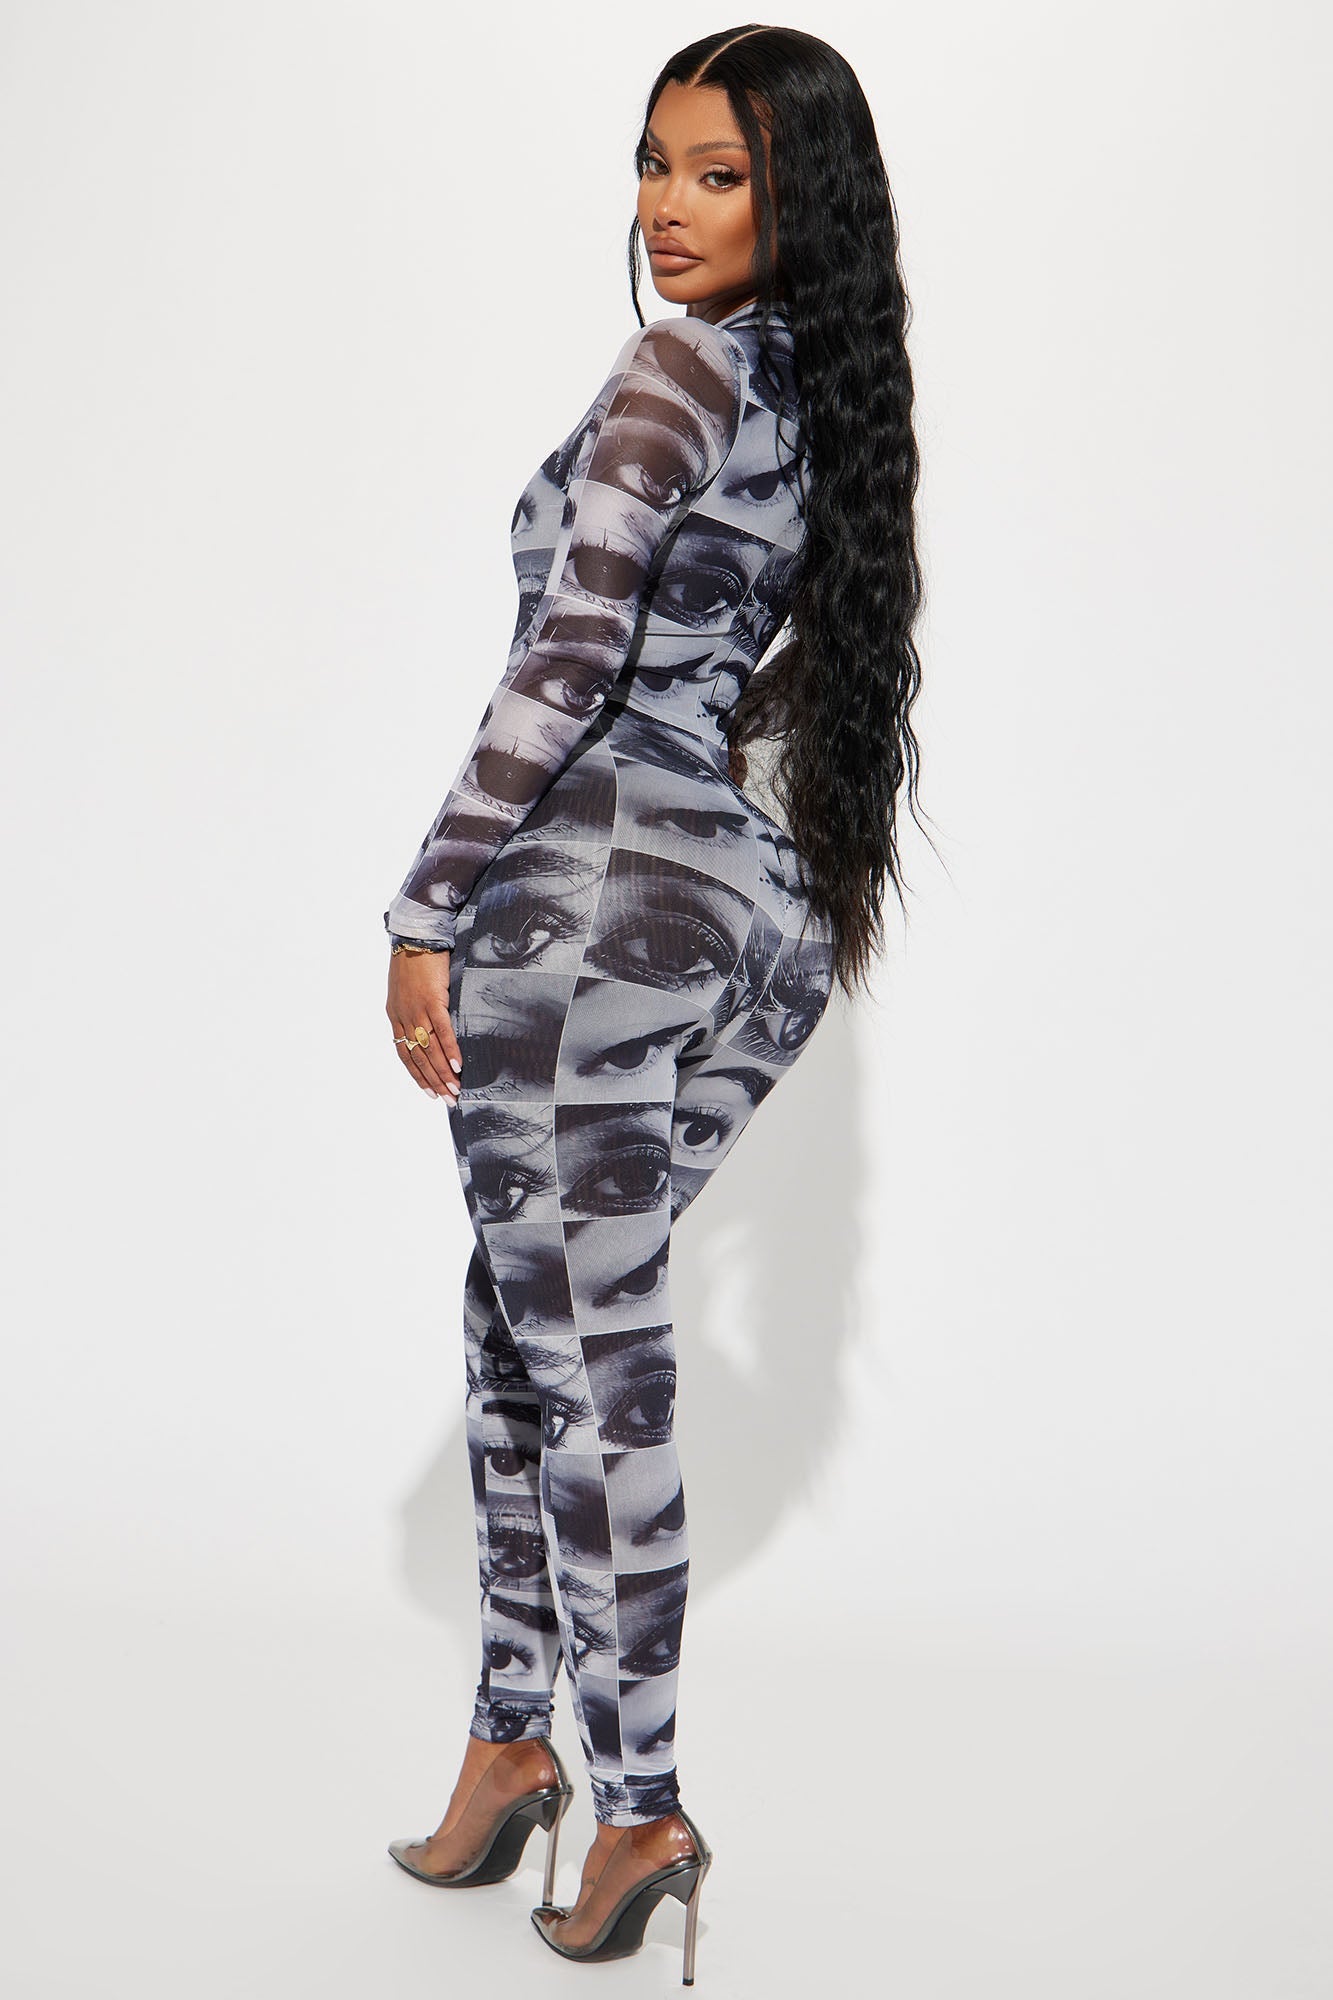 Eye See You Jumpsuit - Black/White